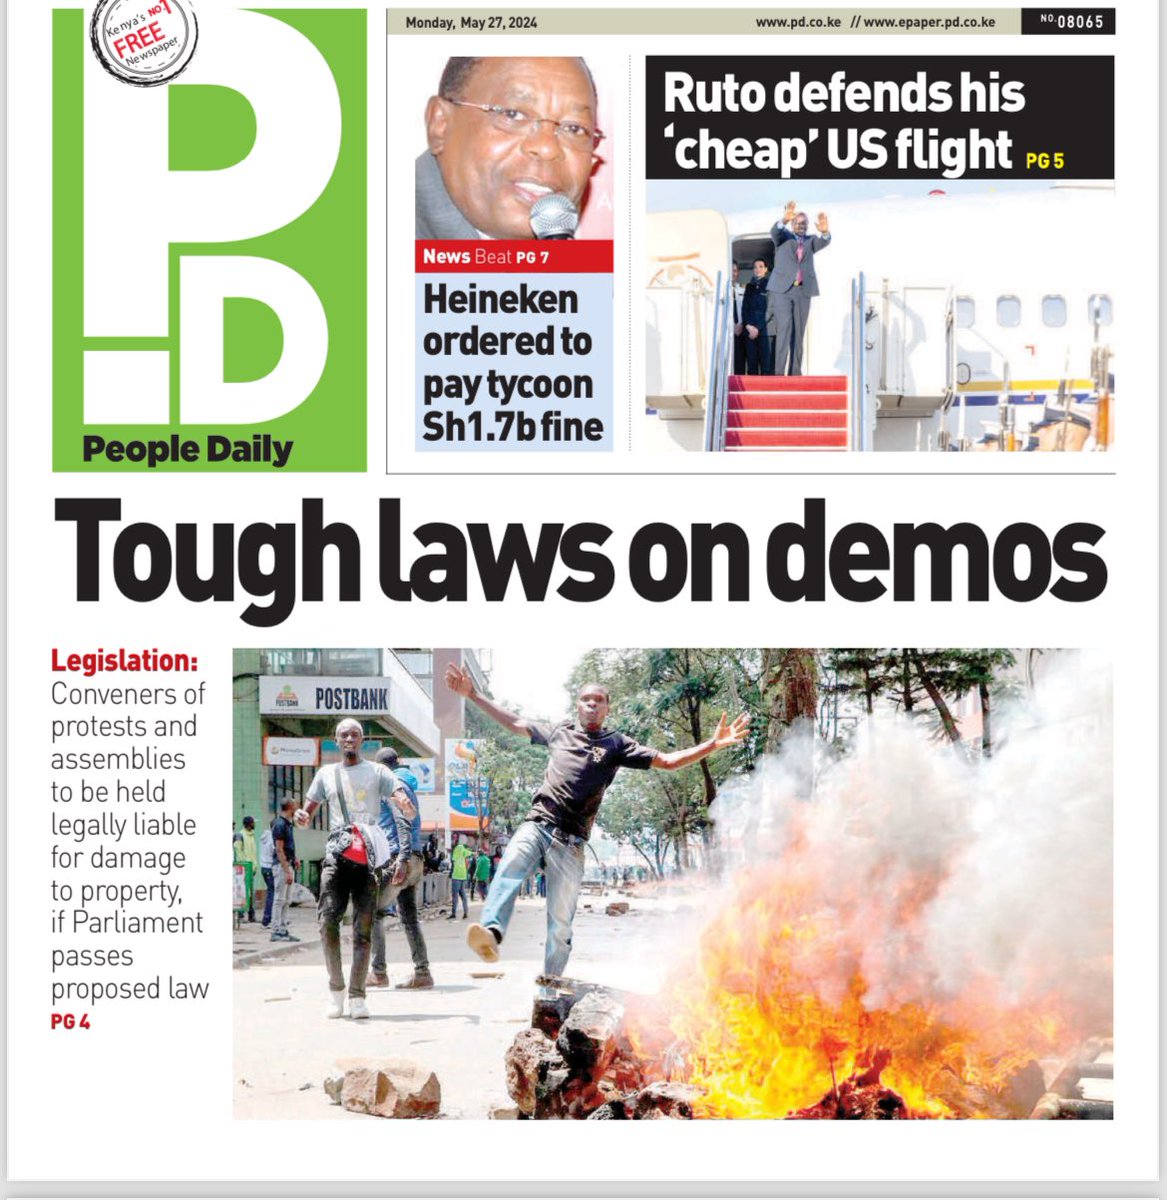 The ruling class in Kenya are unaware about the limit on the bourgeois legal space, in their own childishness they think they can stop class struggle through legislation!